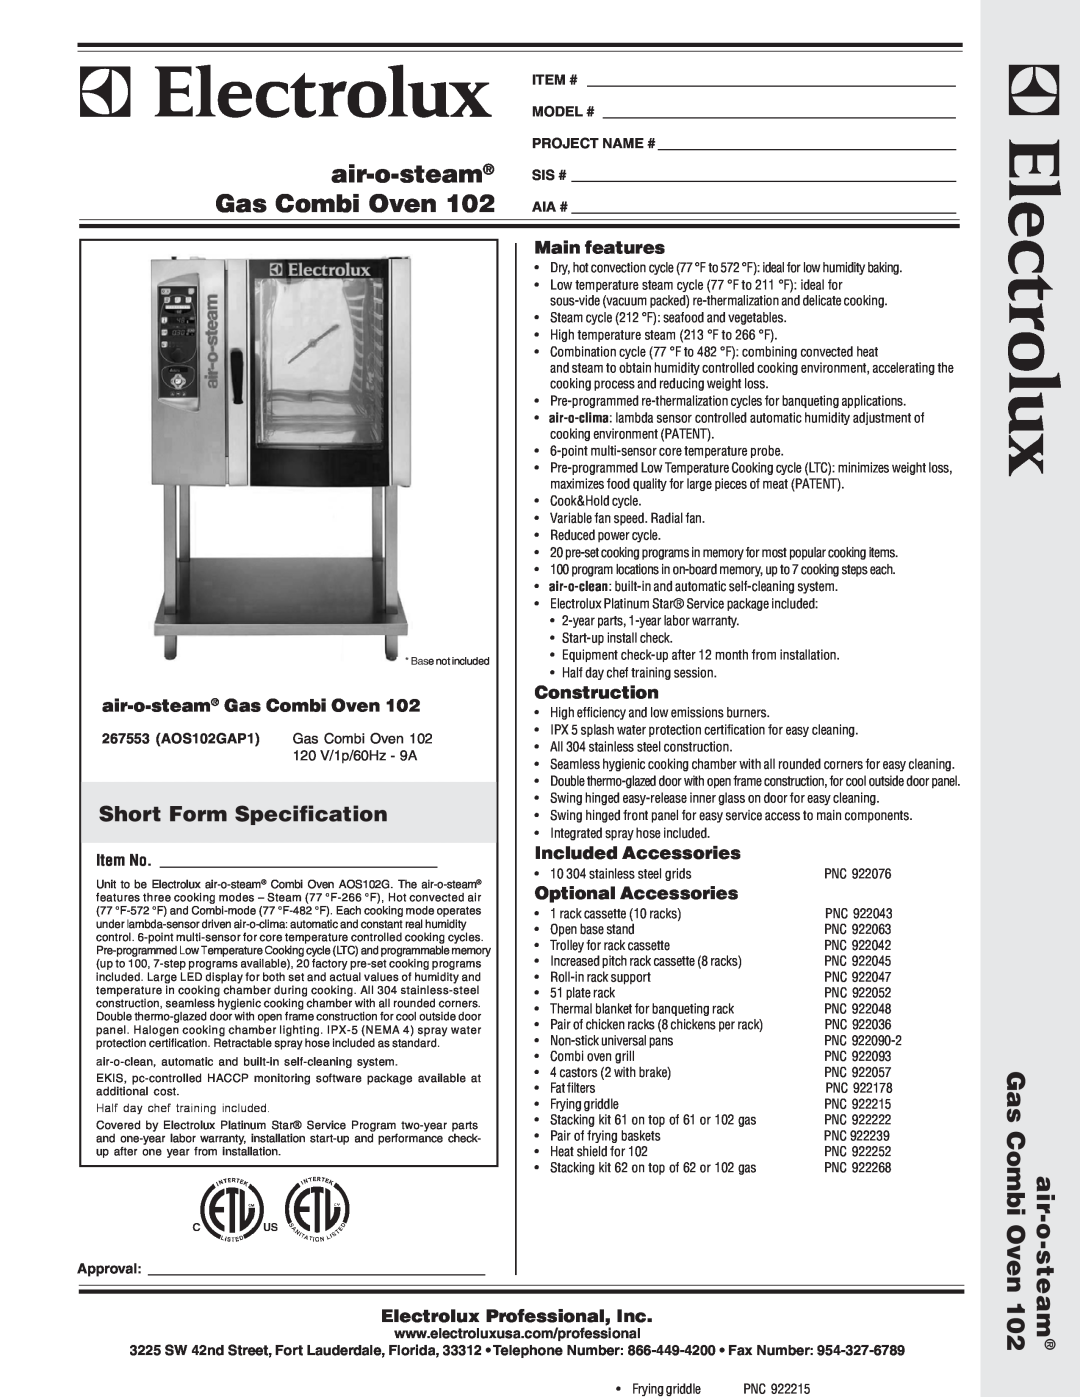 Electrolux AOS102GAP1 warranty Short Form Specification, air-o-steam Gas Combi Oven, Main features, Construction, Item # 